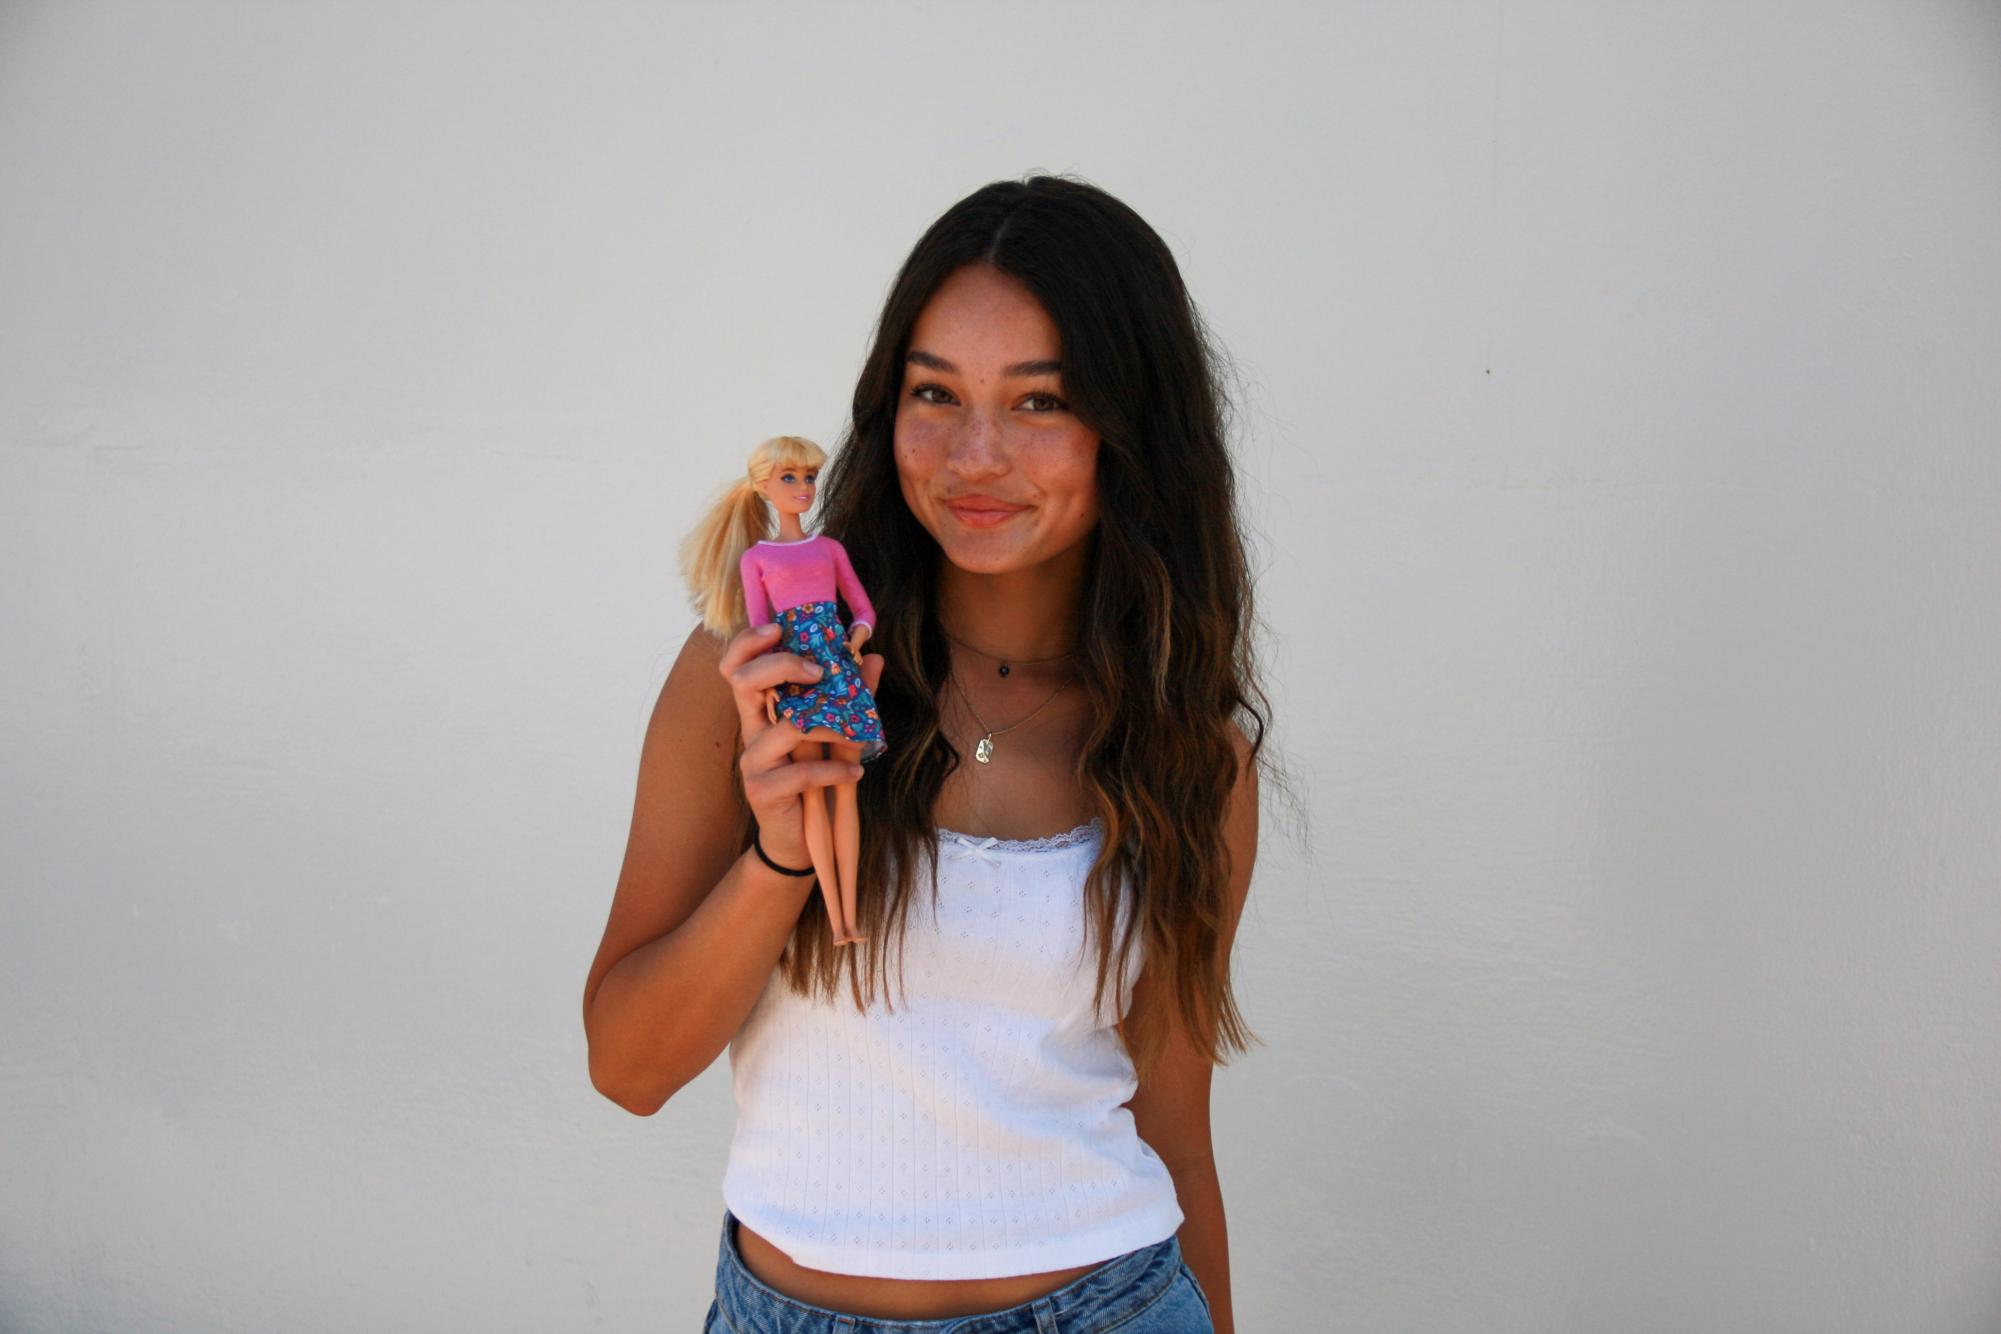 Junior Sloane O’Connor holds a Barbie doll in her hand while bringing her back into her younger days of playing with the doll.